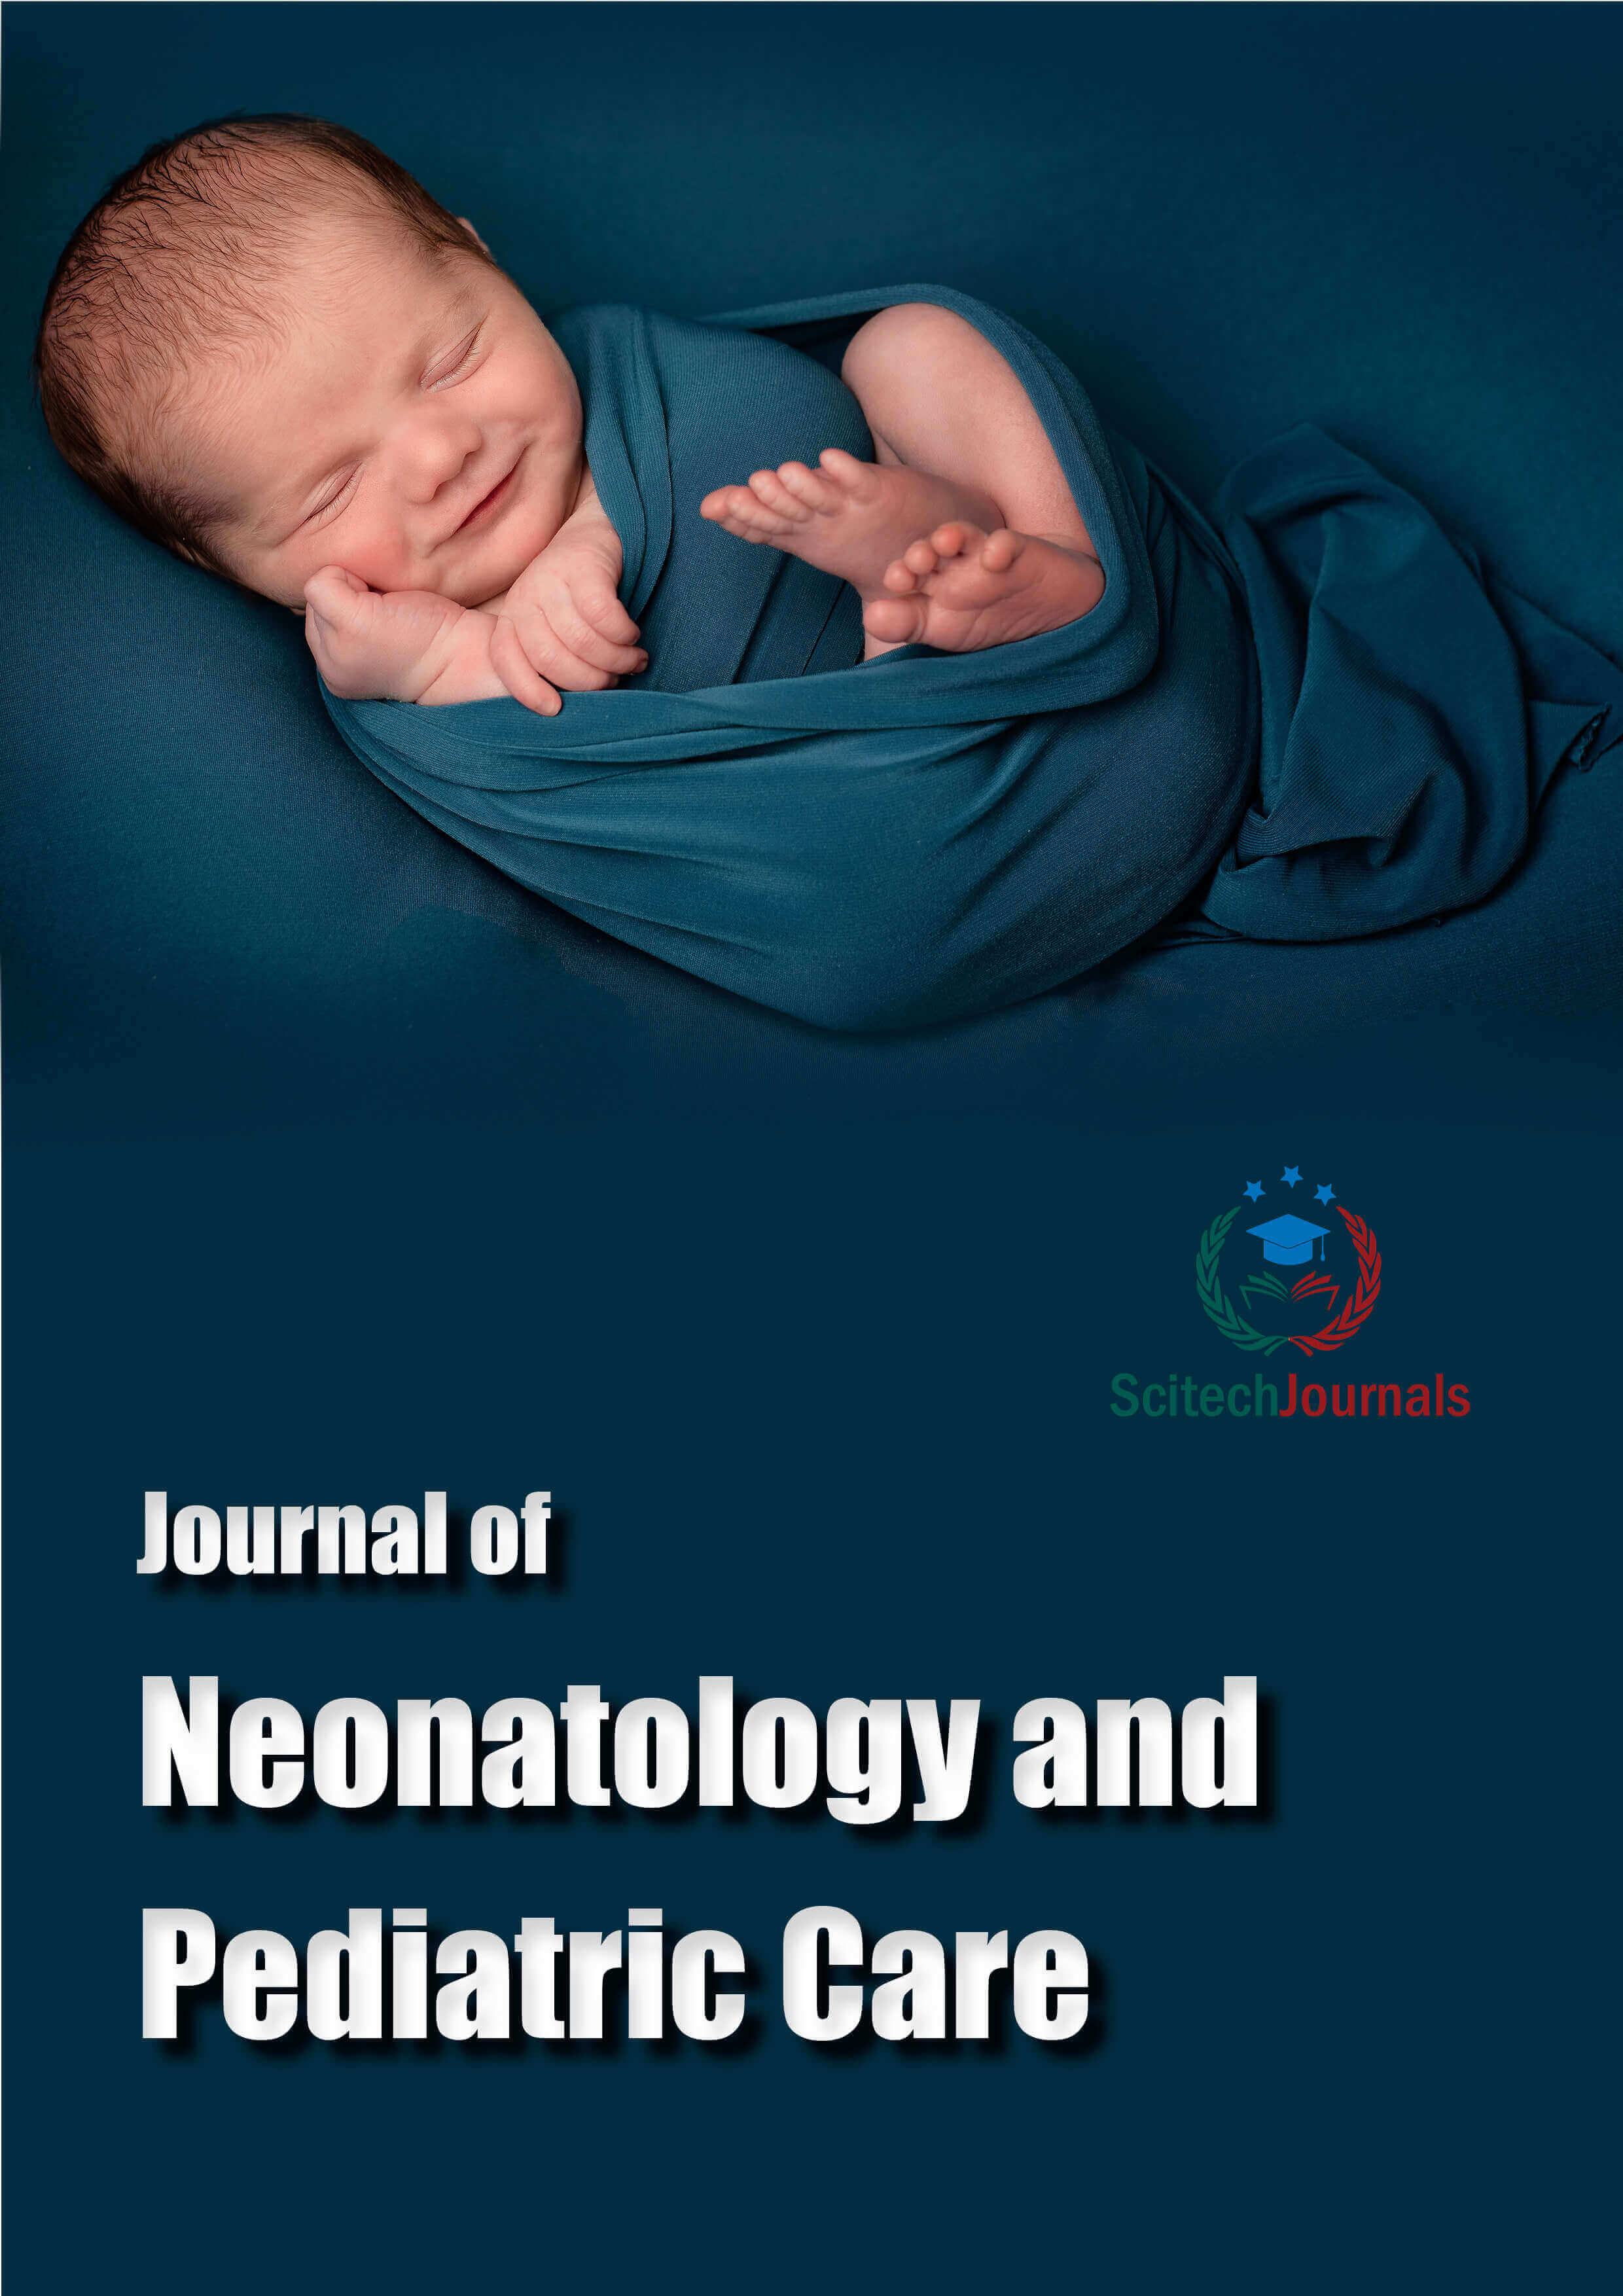 Journal of Neonatology and Pediatric Care